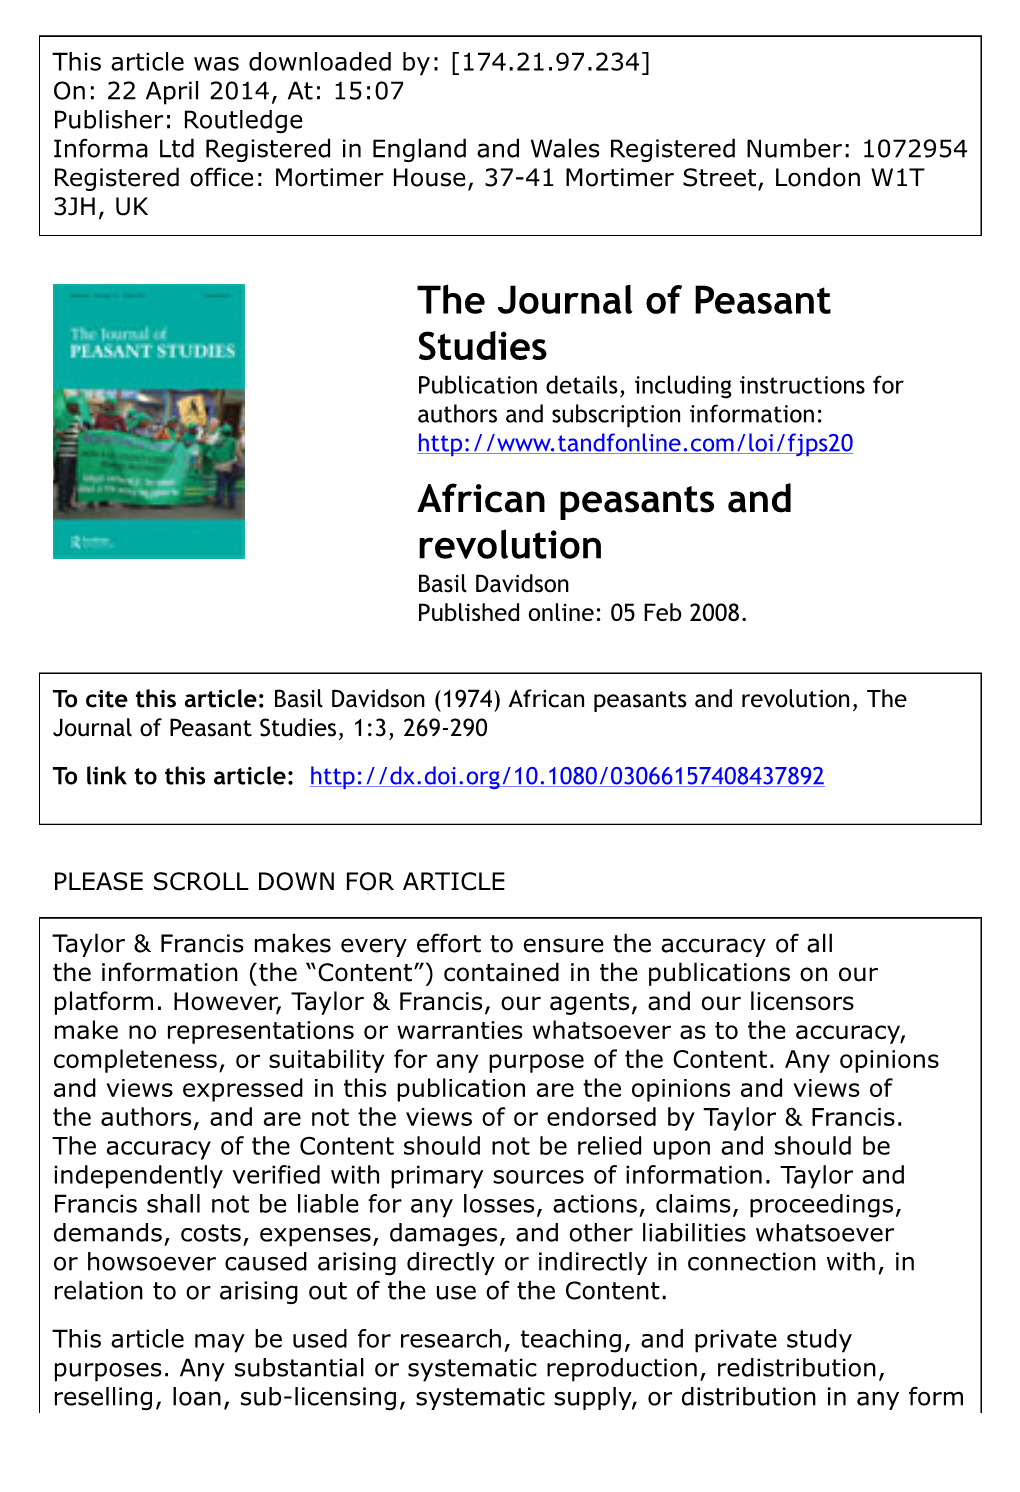 The Journal of Peasant Studies African Peasants and Revolution